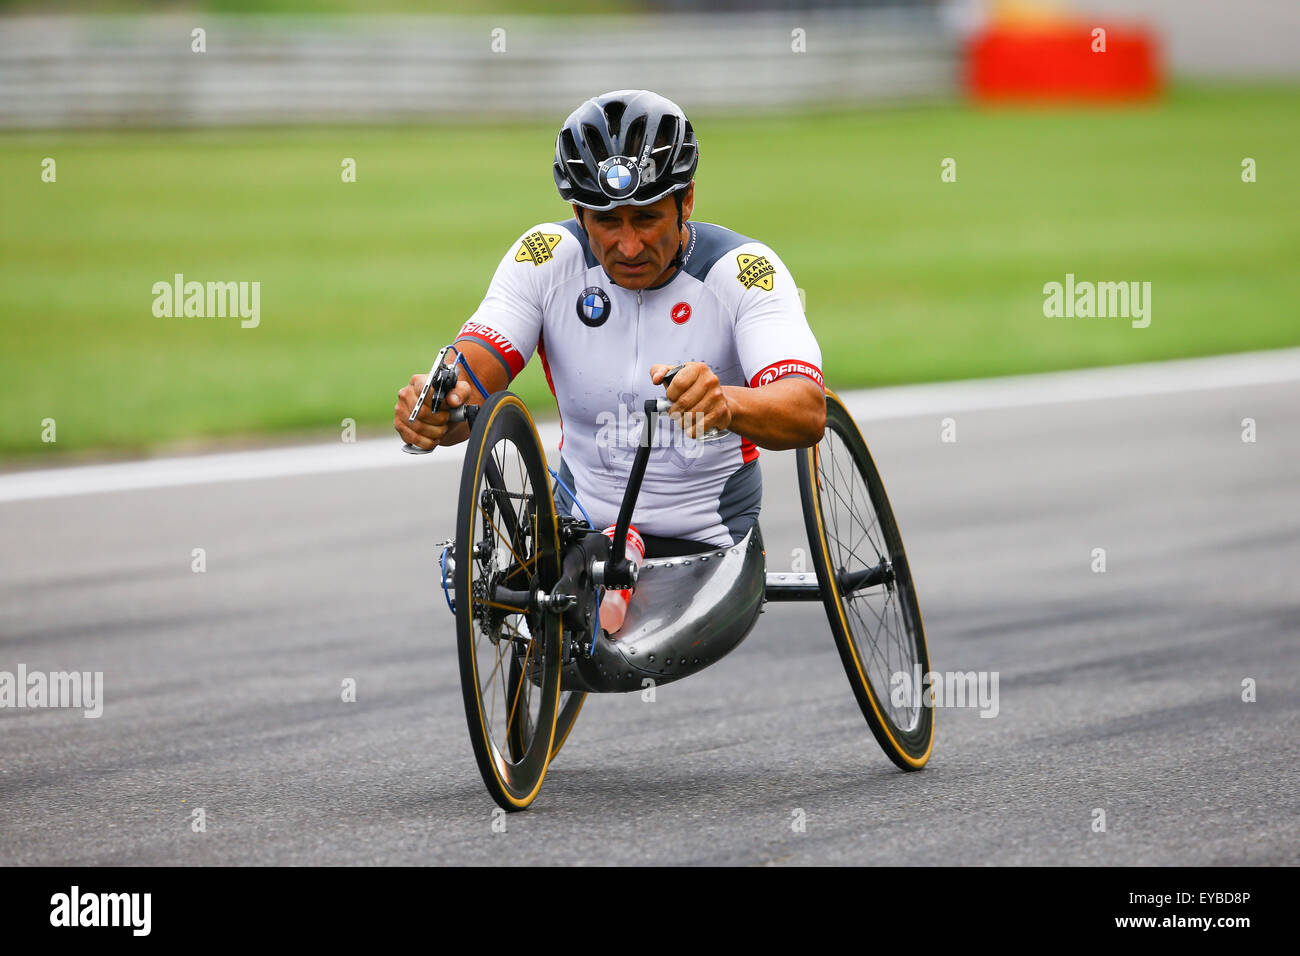 Spa Francorchamps, France. 24th July, 2015. A specially adapted hand-driven bike is demonstrated by Alex Zanardi, who raced against Timo Glock on a regular racing bike. © Action Plus Sports/Alamy Live News Stock Photo